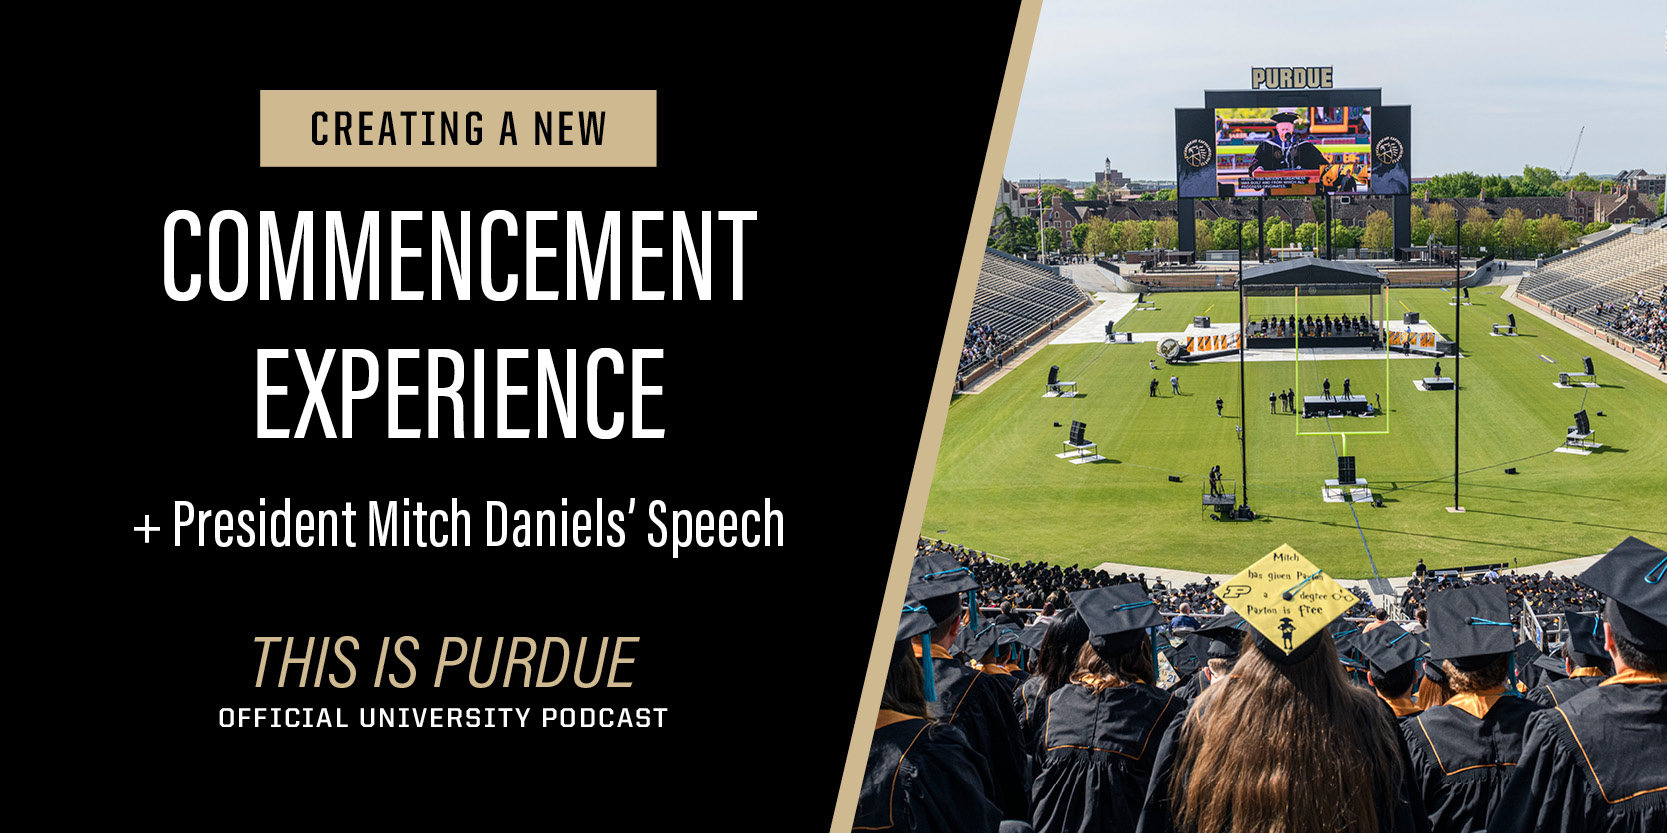 Creating a New Commencement Experience + Purdue President Mitch Daniels